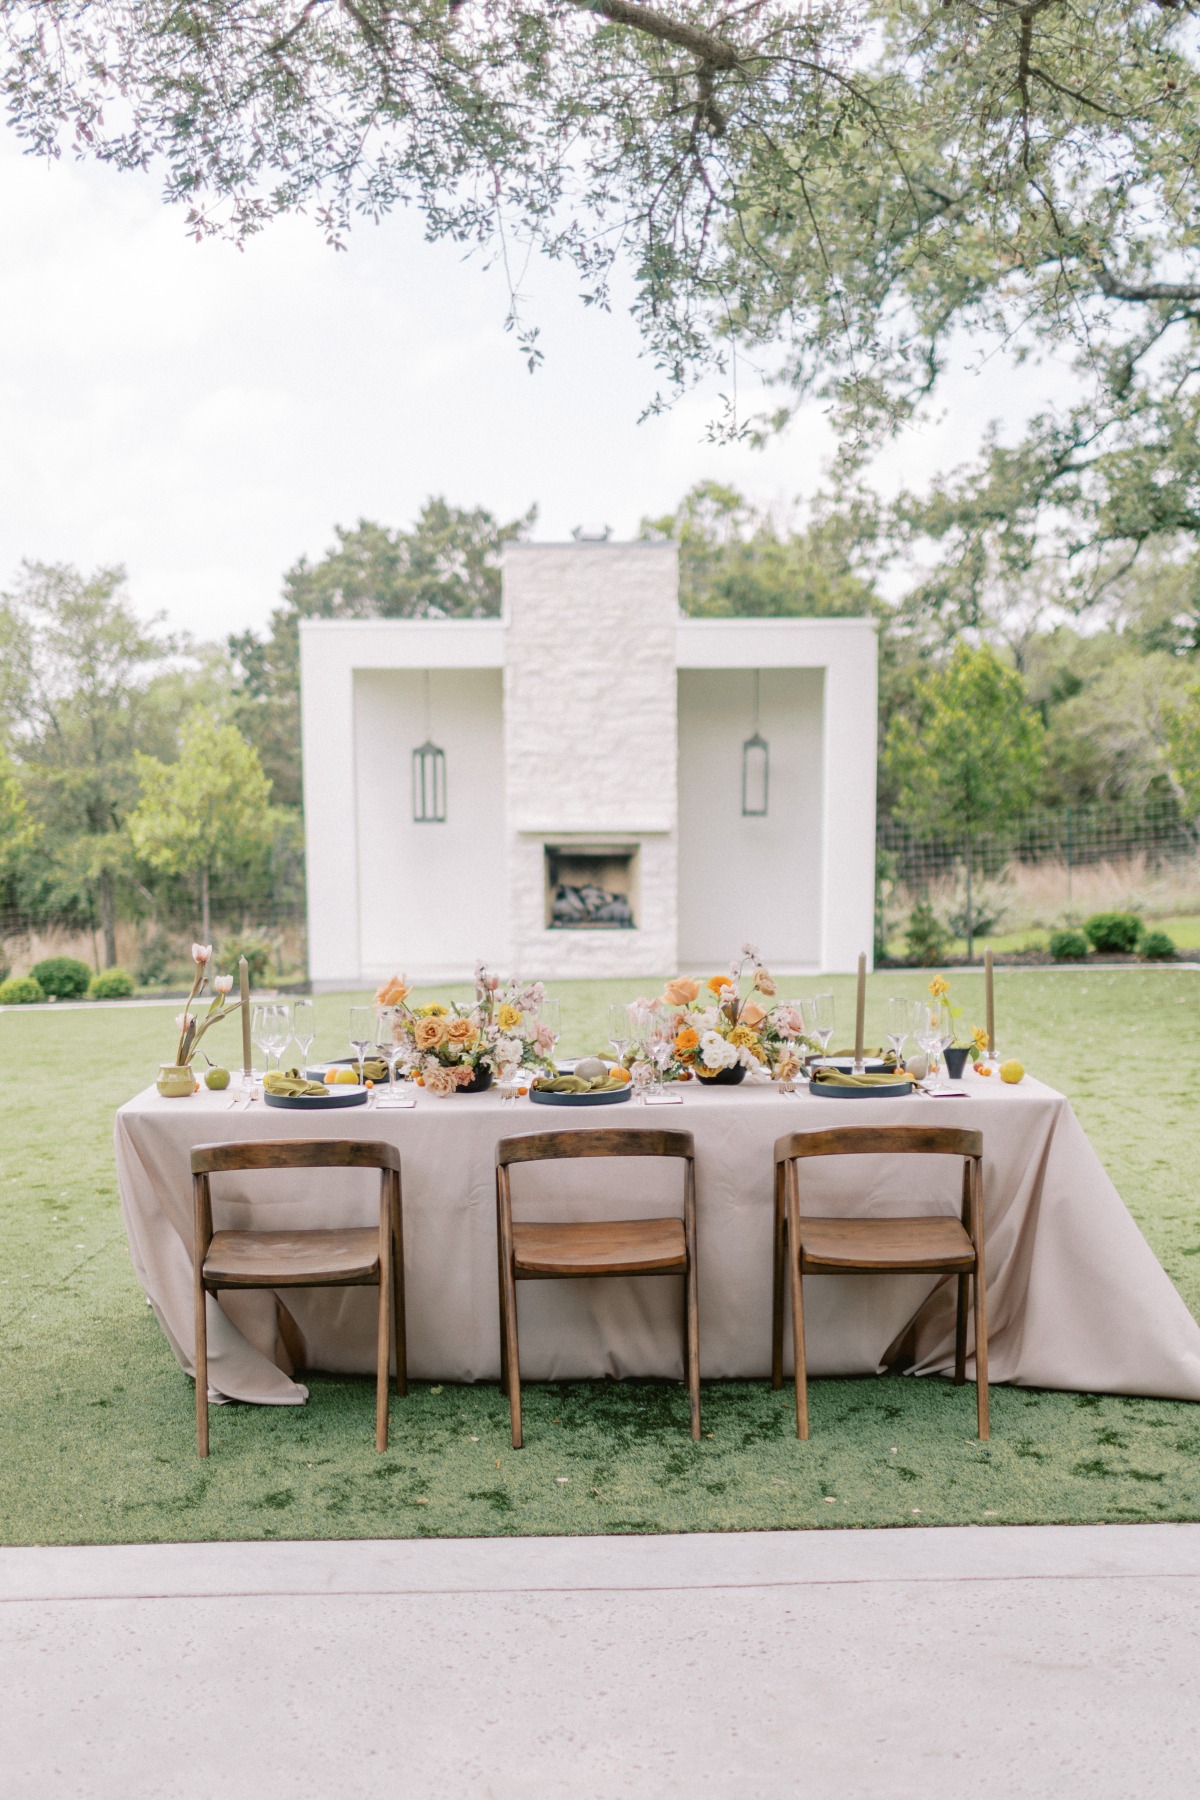 Reception table with place settings and summer floral centerpieces in front of outdoor fireplace